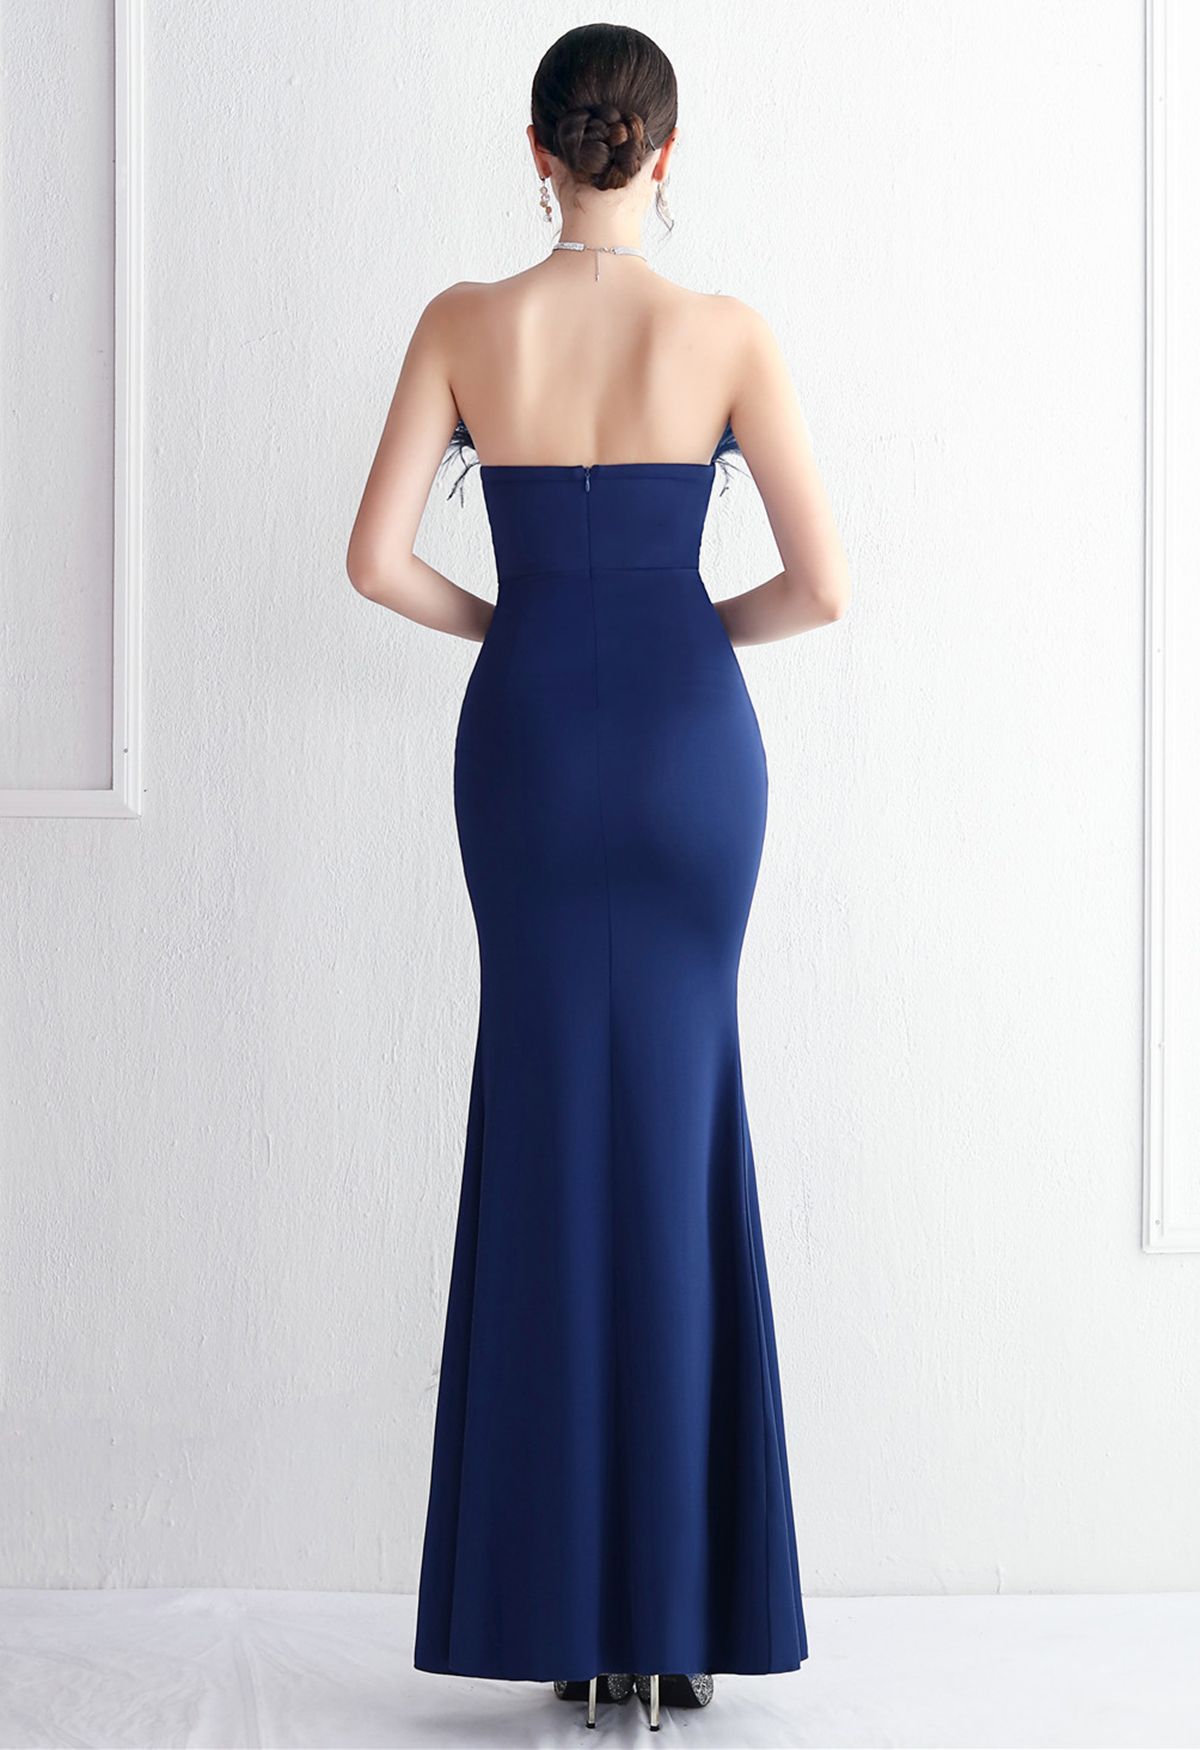 Feather Trim Strapless Slit Gown in Navy